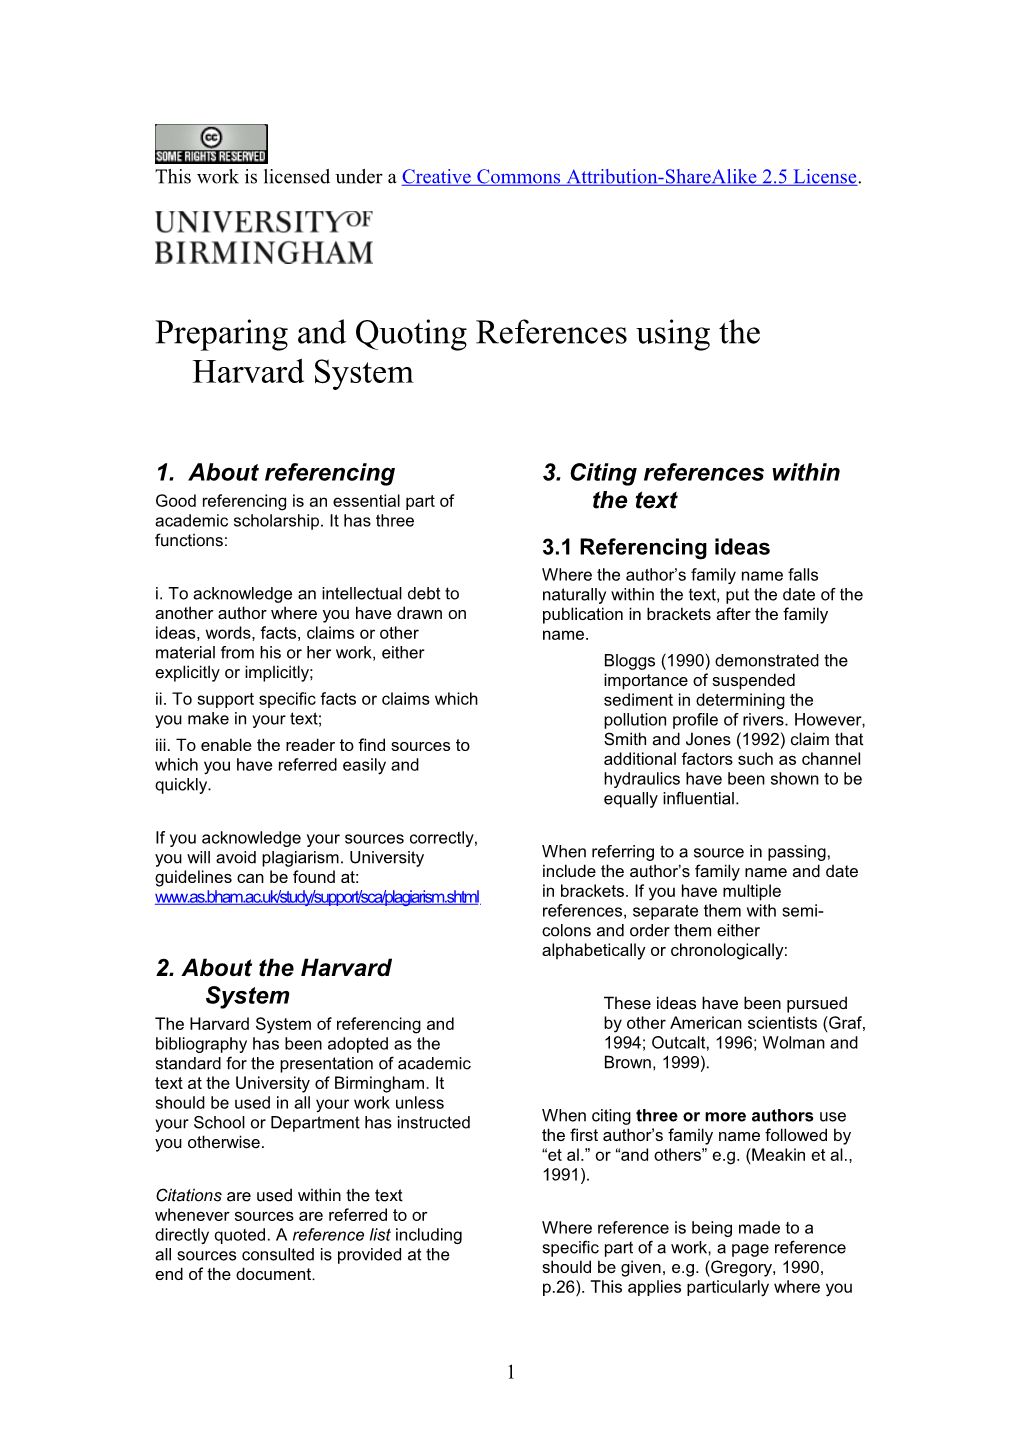 Preparing and Quoting References Using the Harvard System